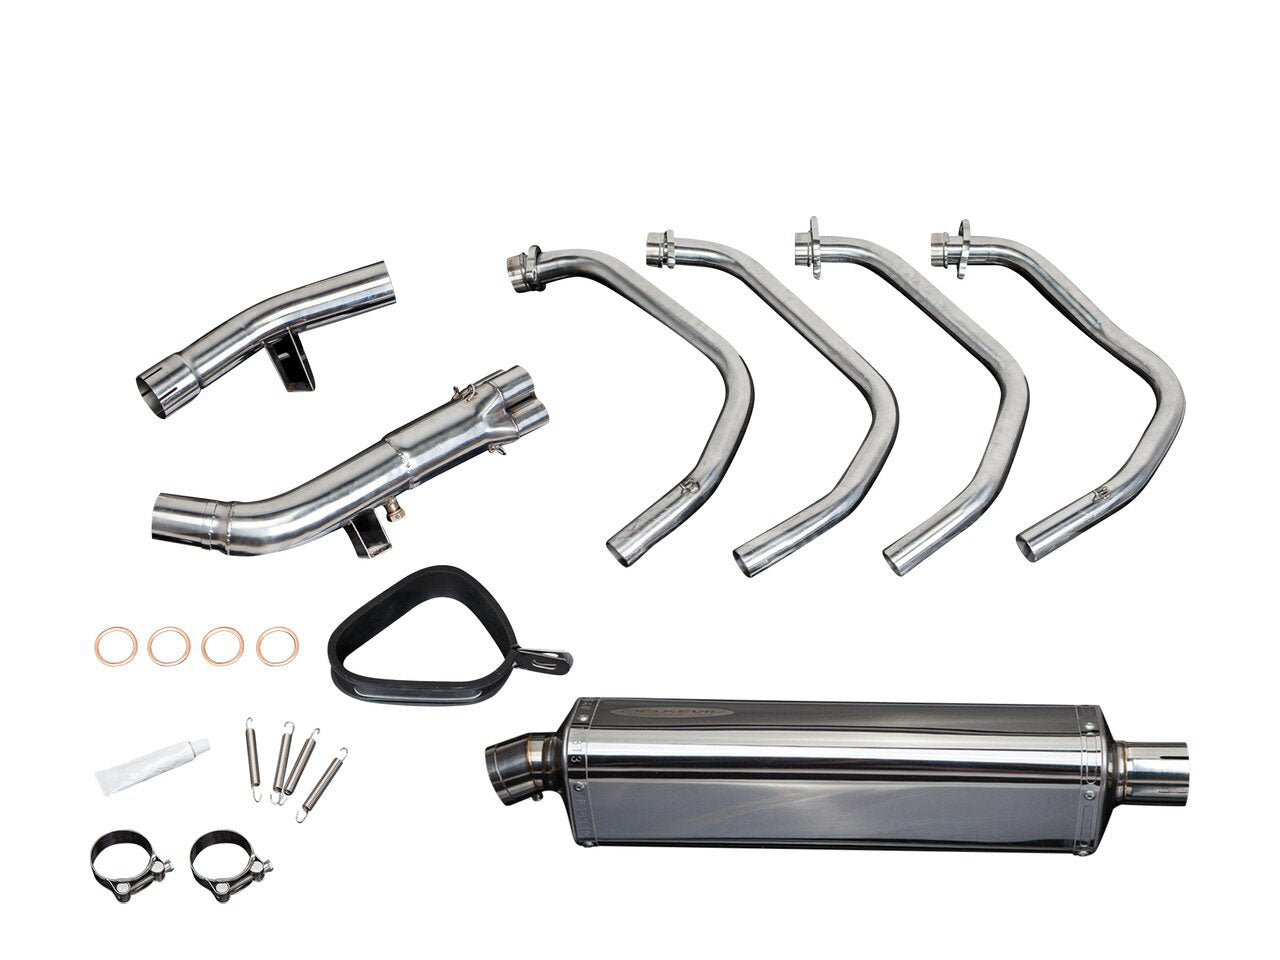 DELKEVIC Suzuki GSF1250 Bandit Full Exhaust System with Stubby 17" Tri-Oval Silencer